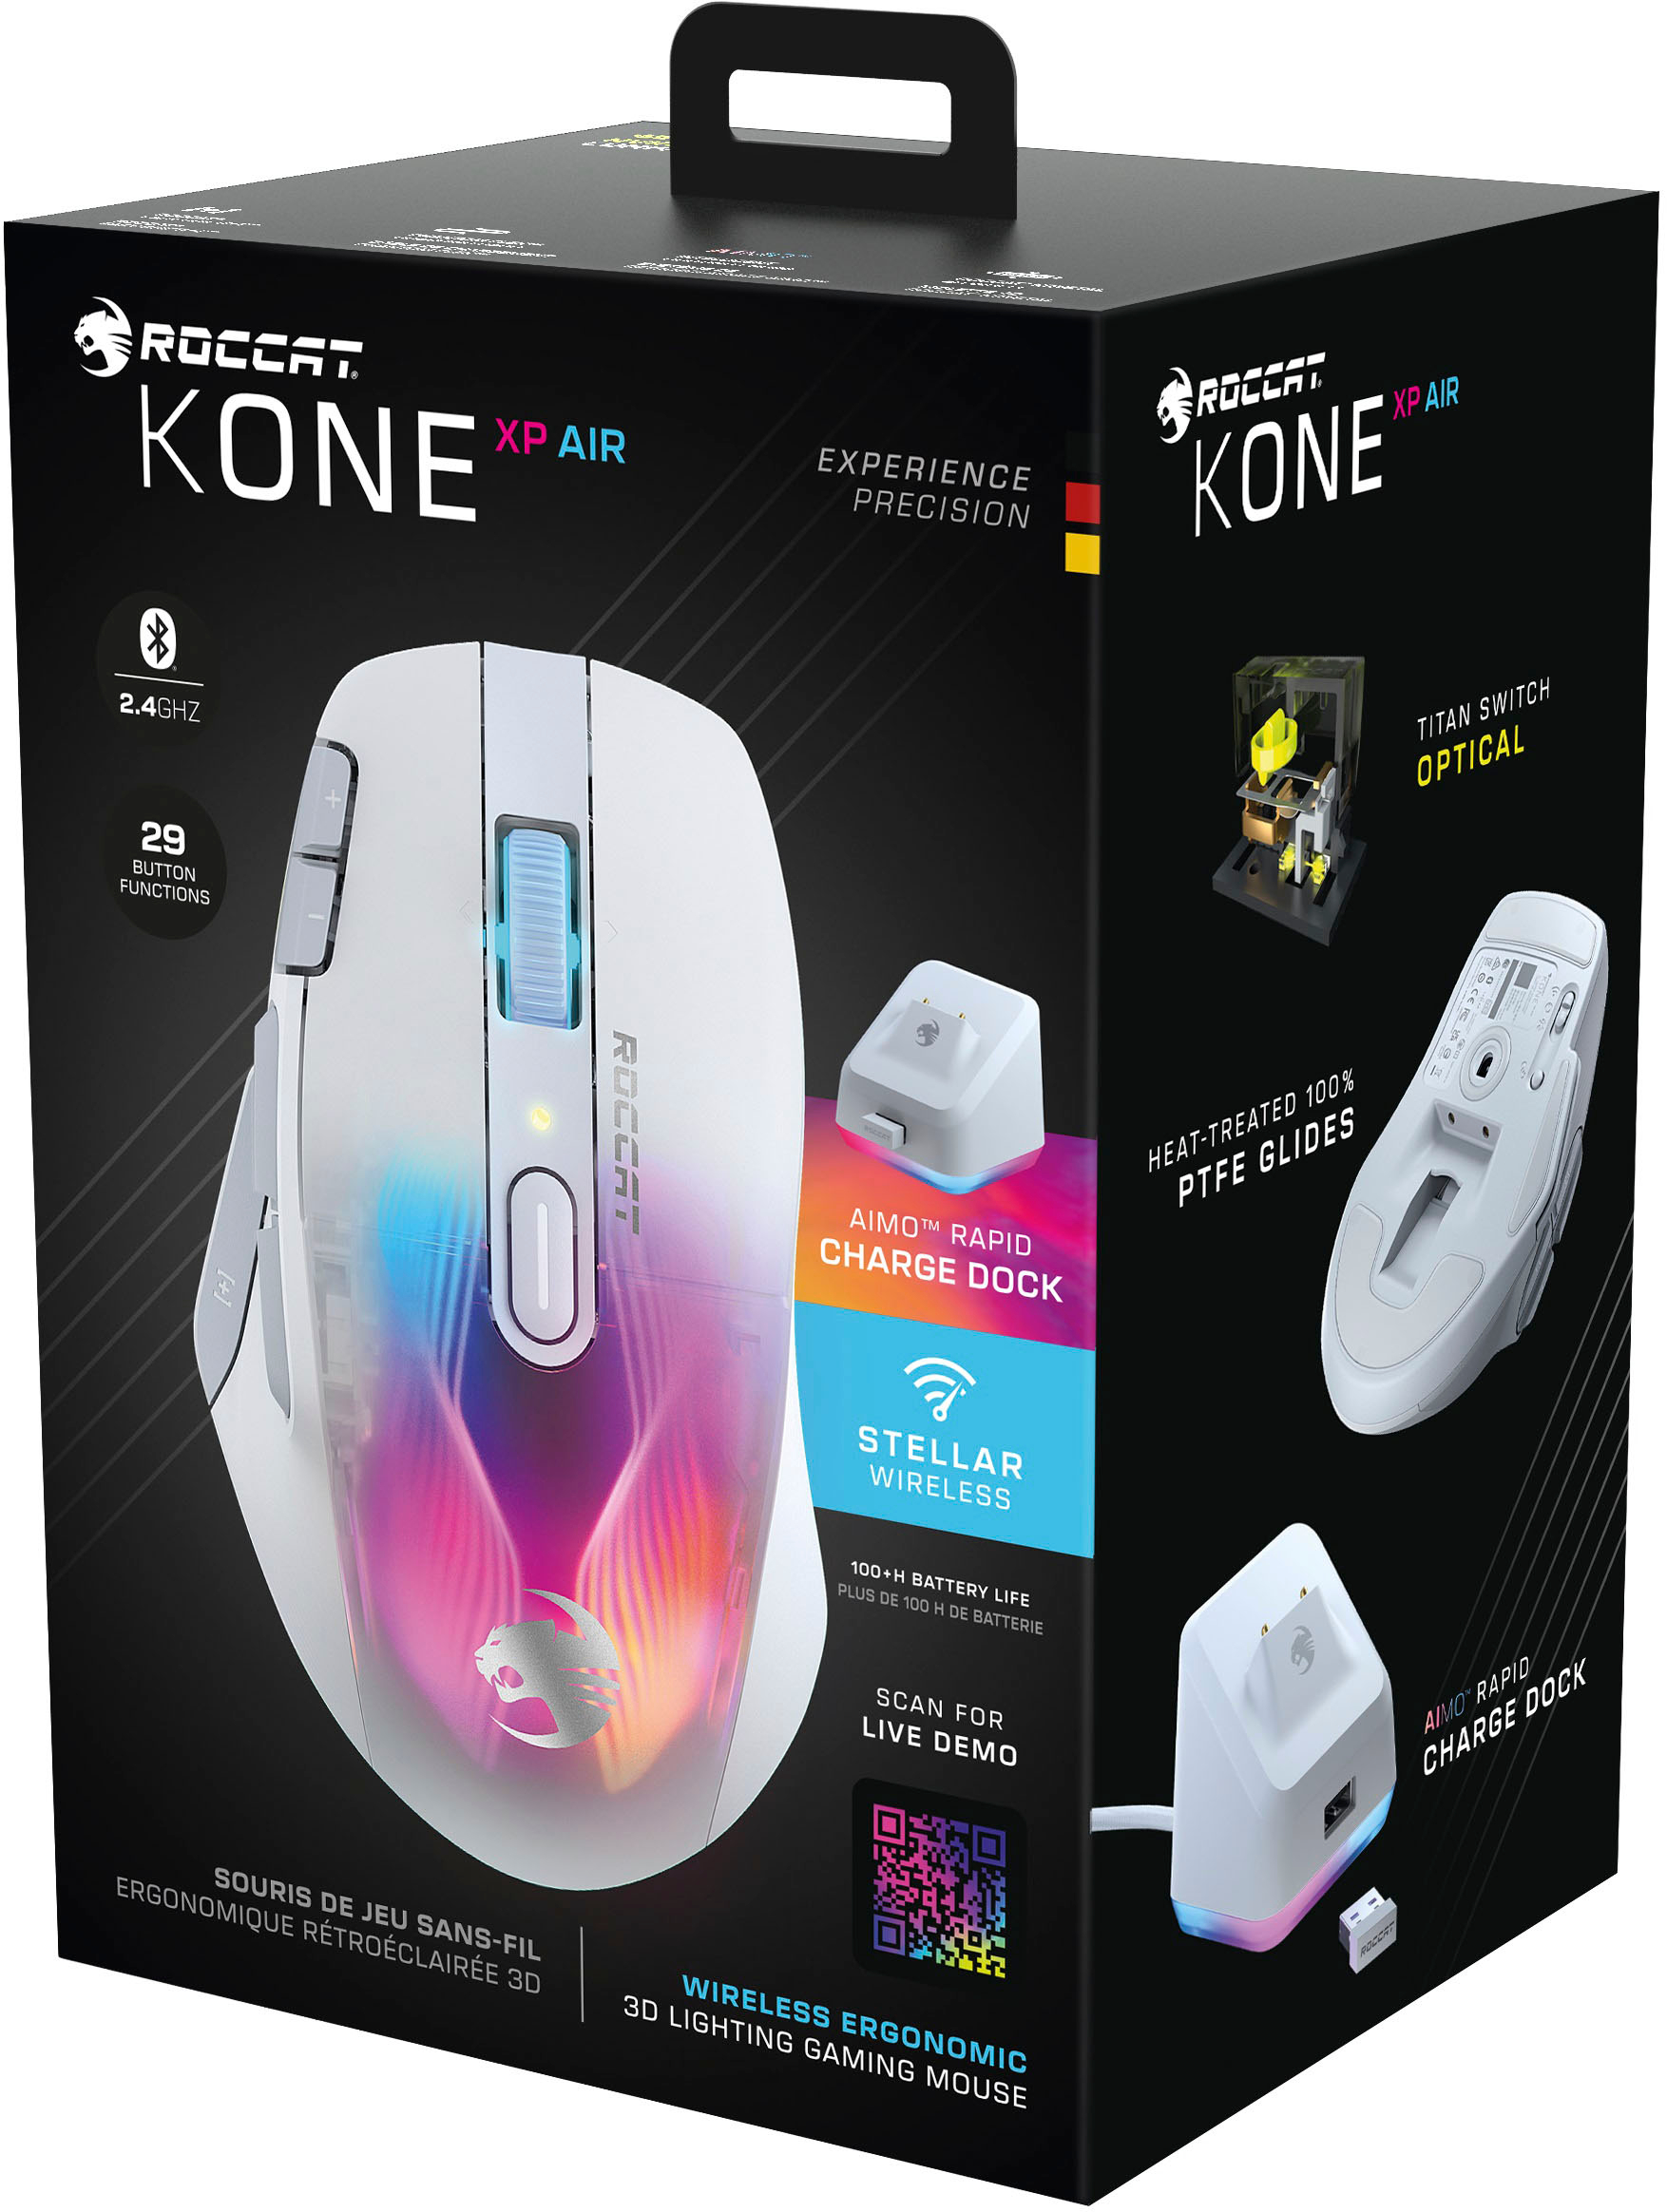 Kone XP 3D Lighting 15 Button Gaming Mouse